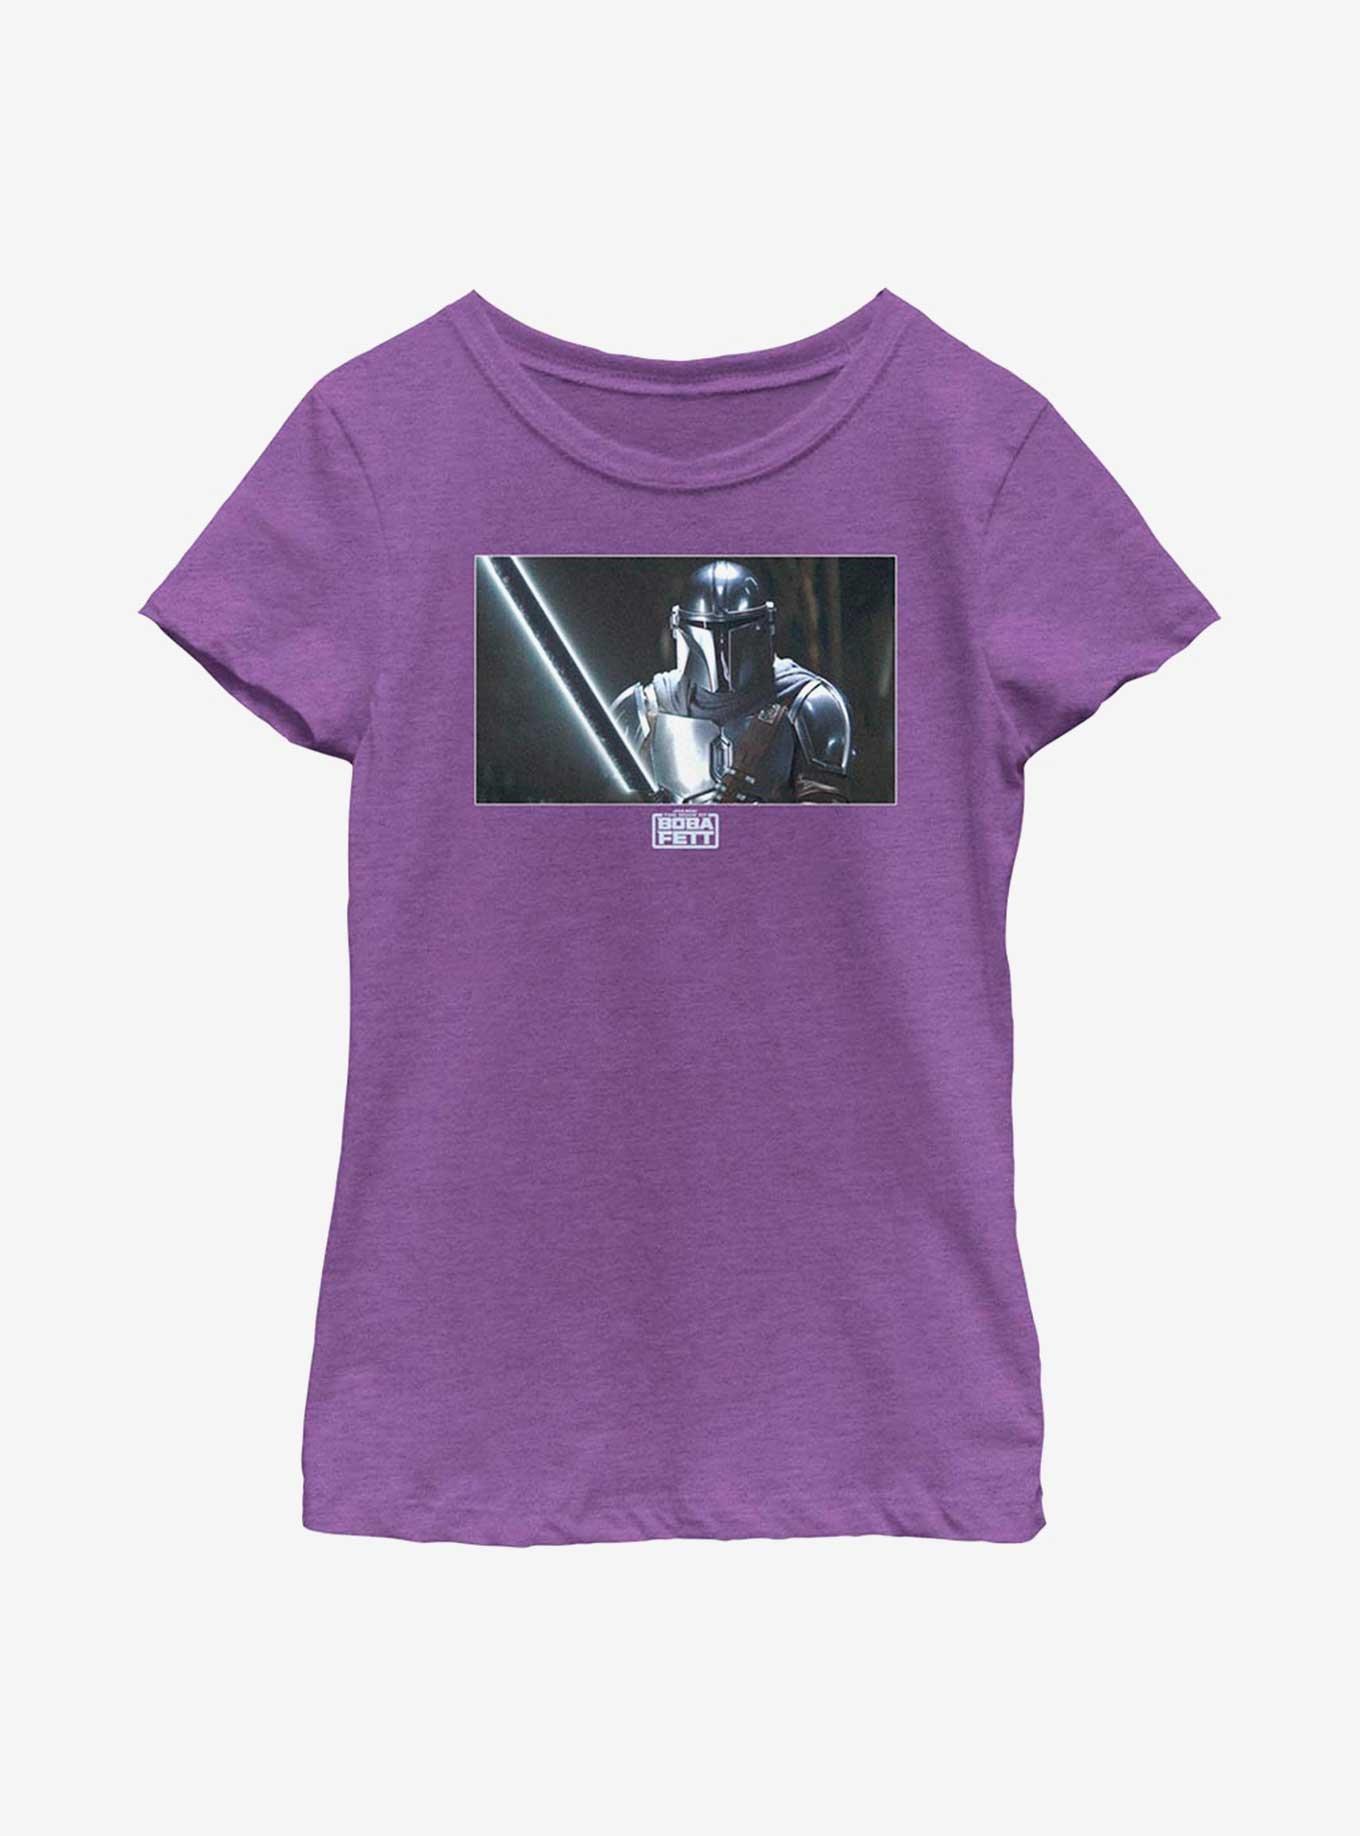 Star Wars The Book Of Boba Fett Warm Or Cold Youth Girls T-Shirt, PURPLE BERRY, hi-res